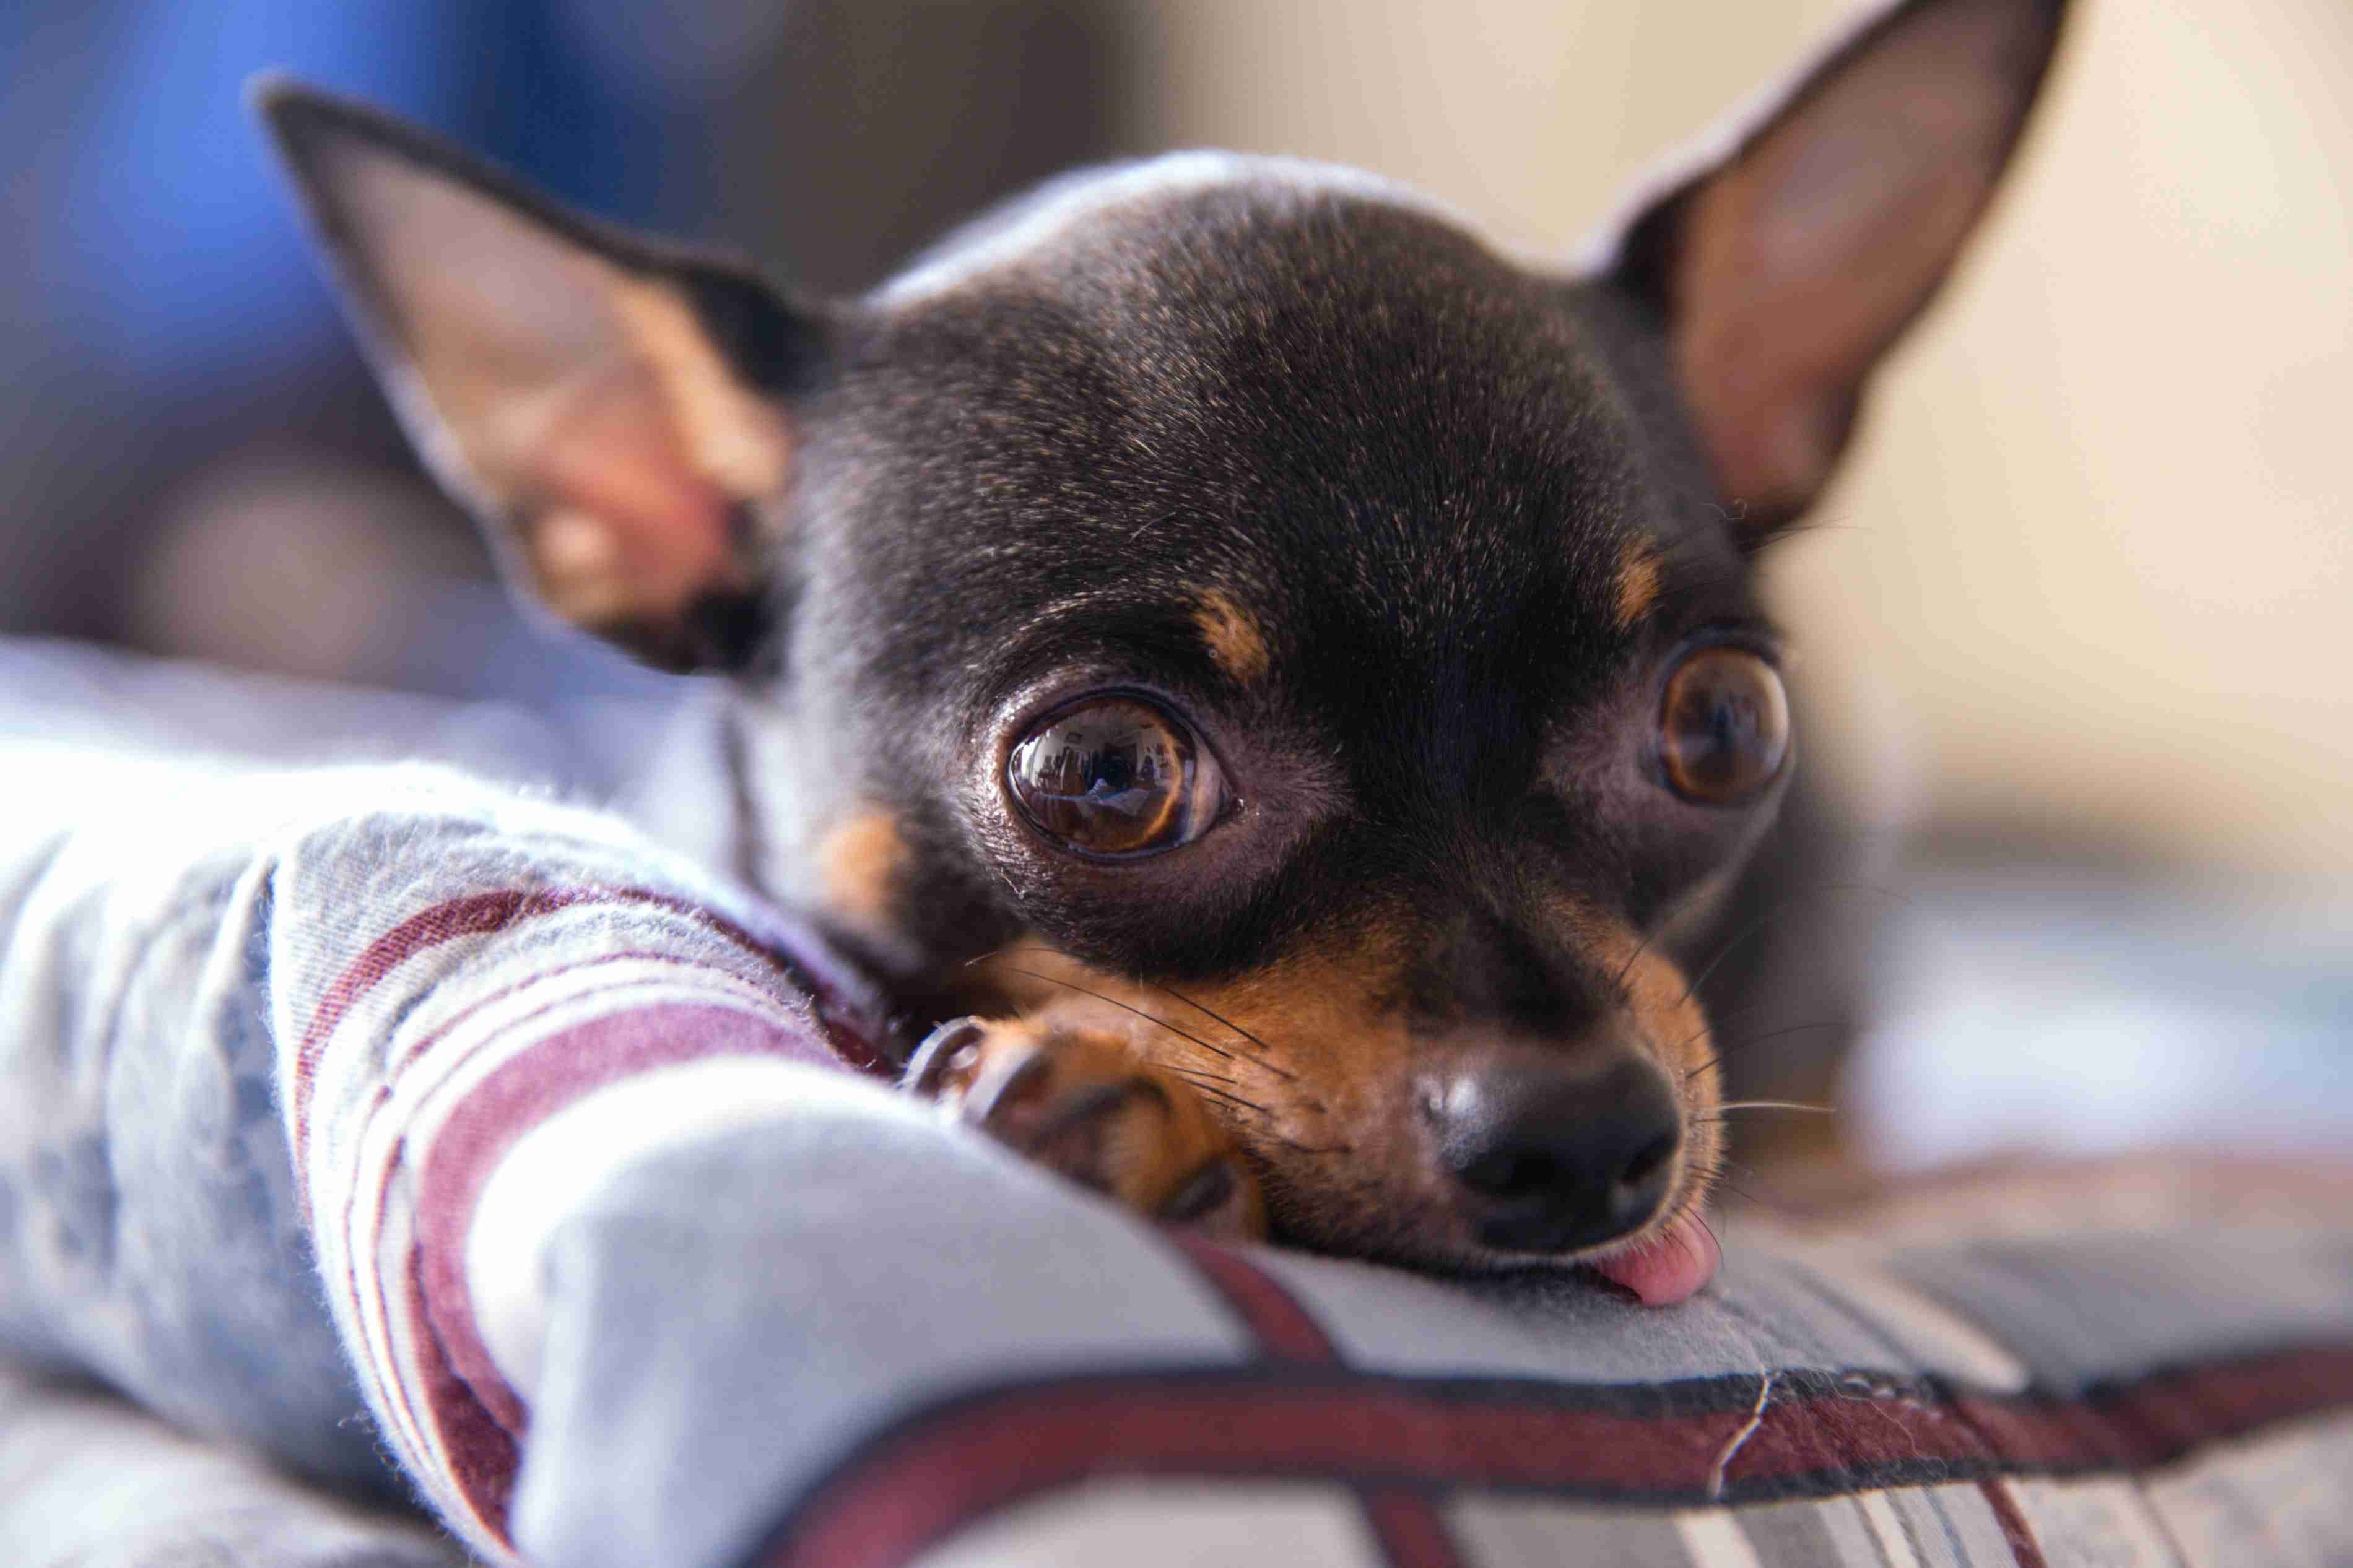 How can you recognize signs of aggression in a Chihuahua that may not be immediately obvious?